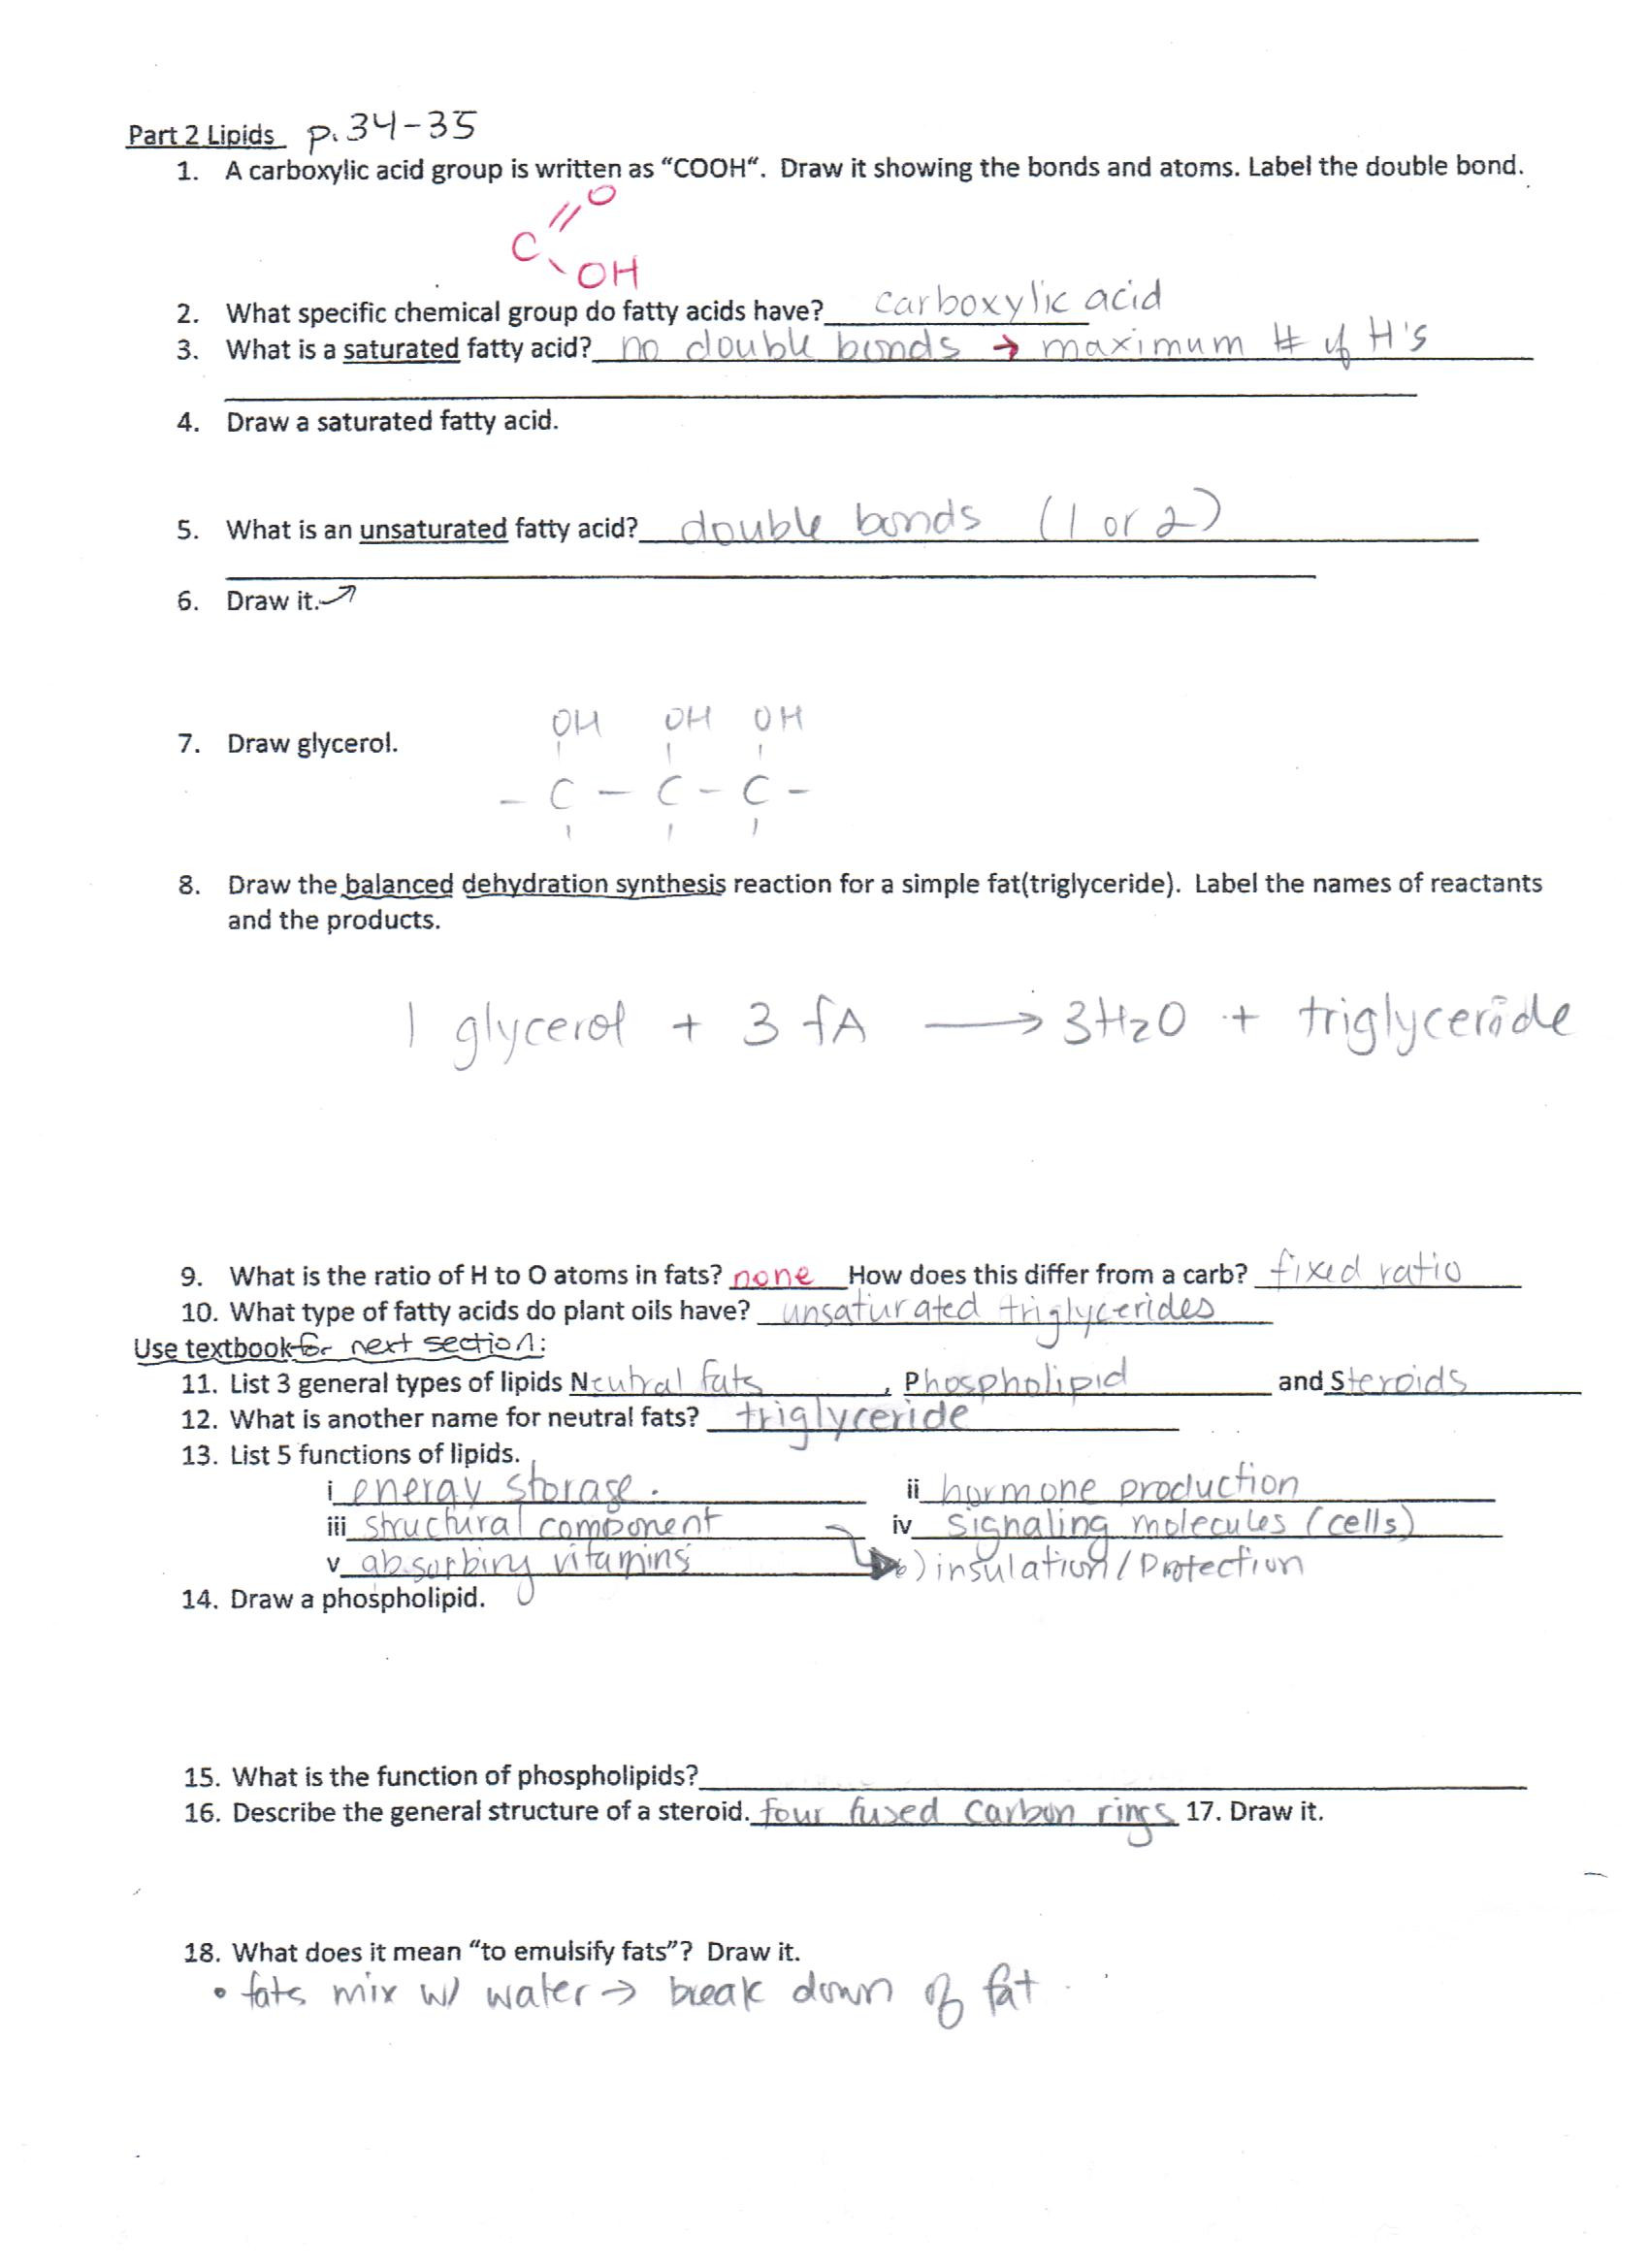 nucleic acids worksheet answers m=0